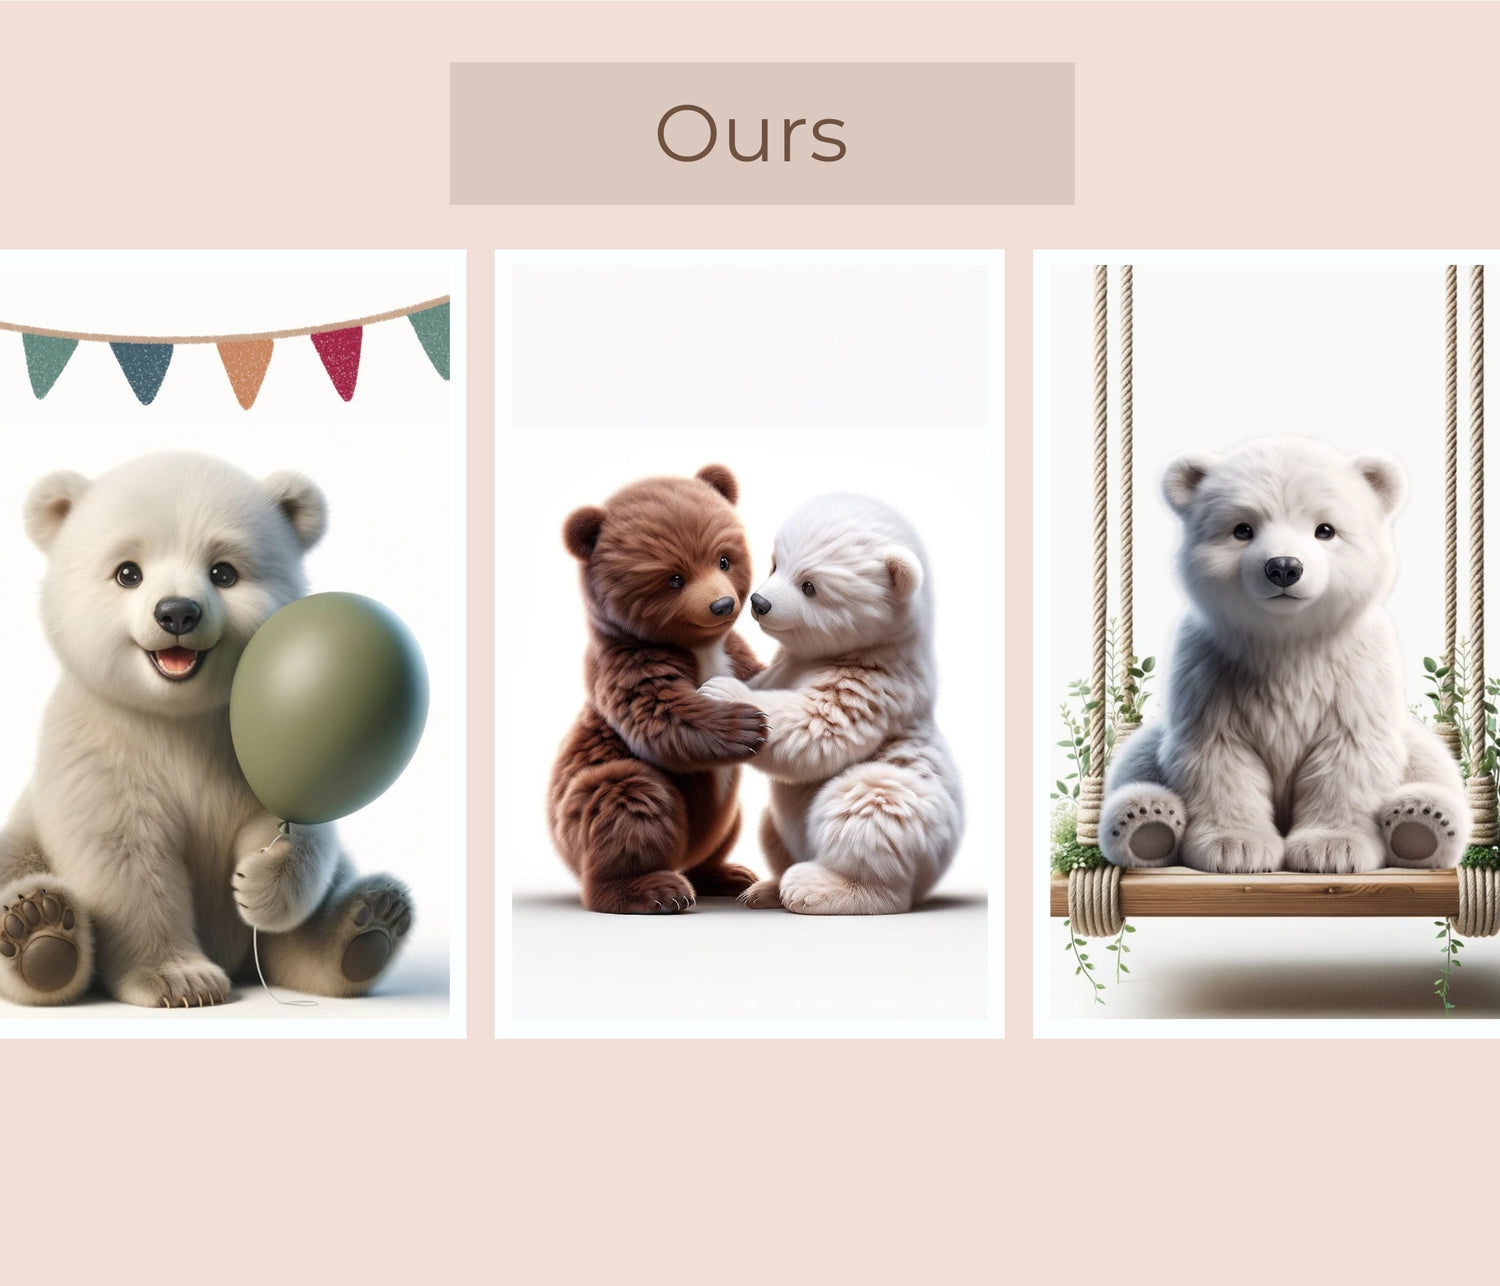 Affiches - OURS